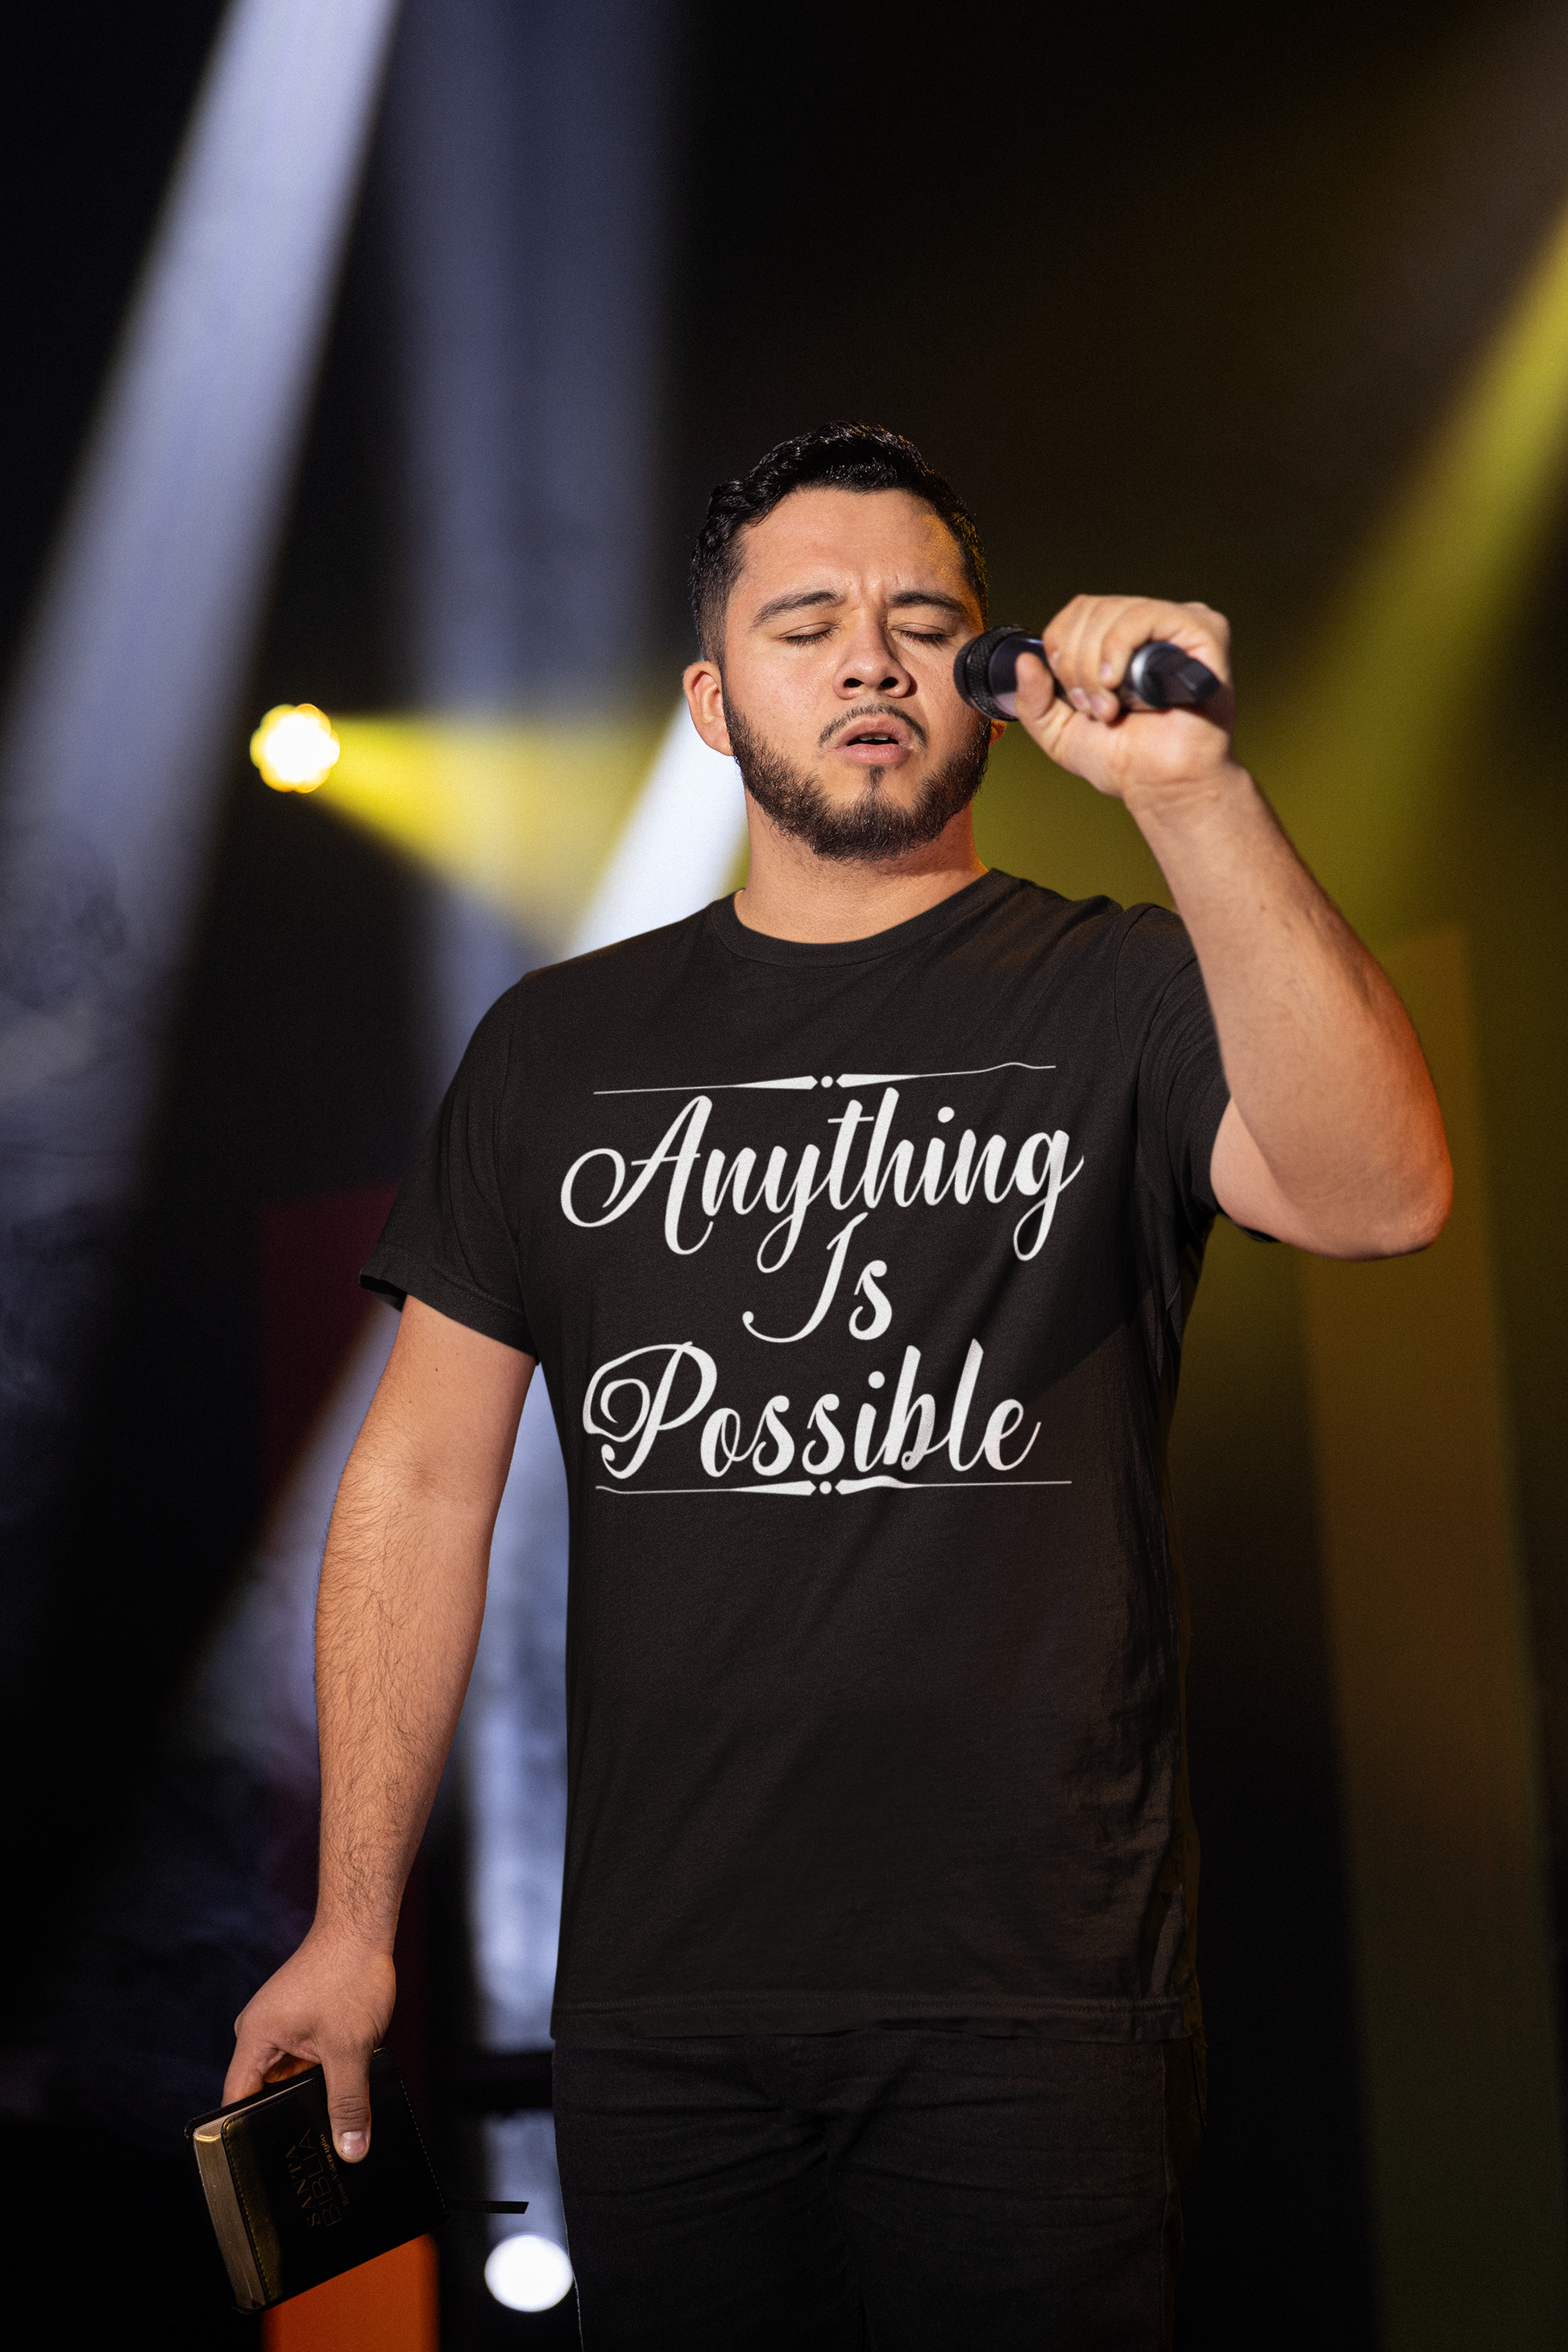 Anything Is Possible Motivational T-Shirt - Unisex - Motivational Treats